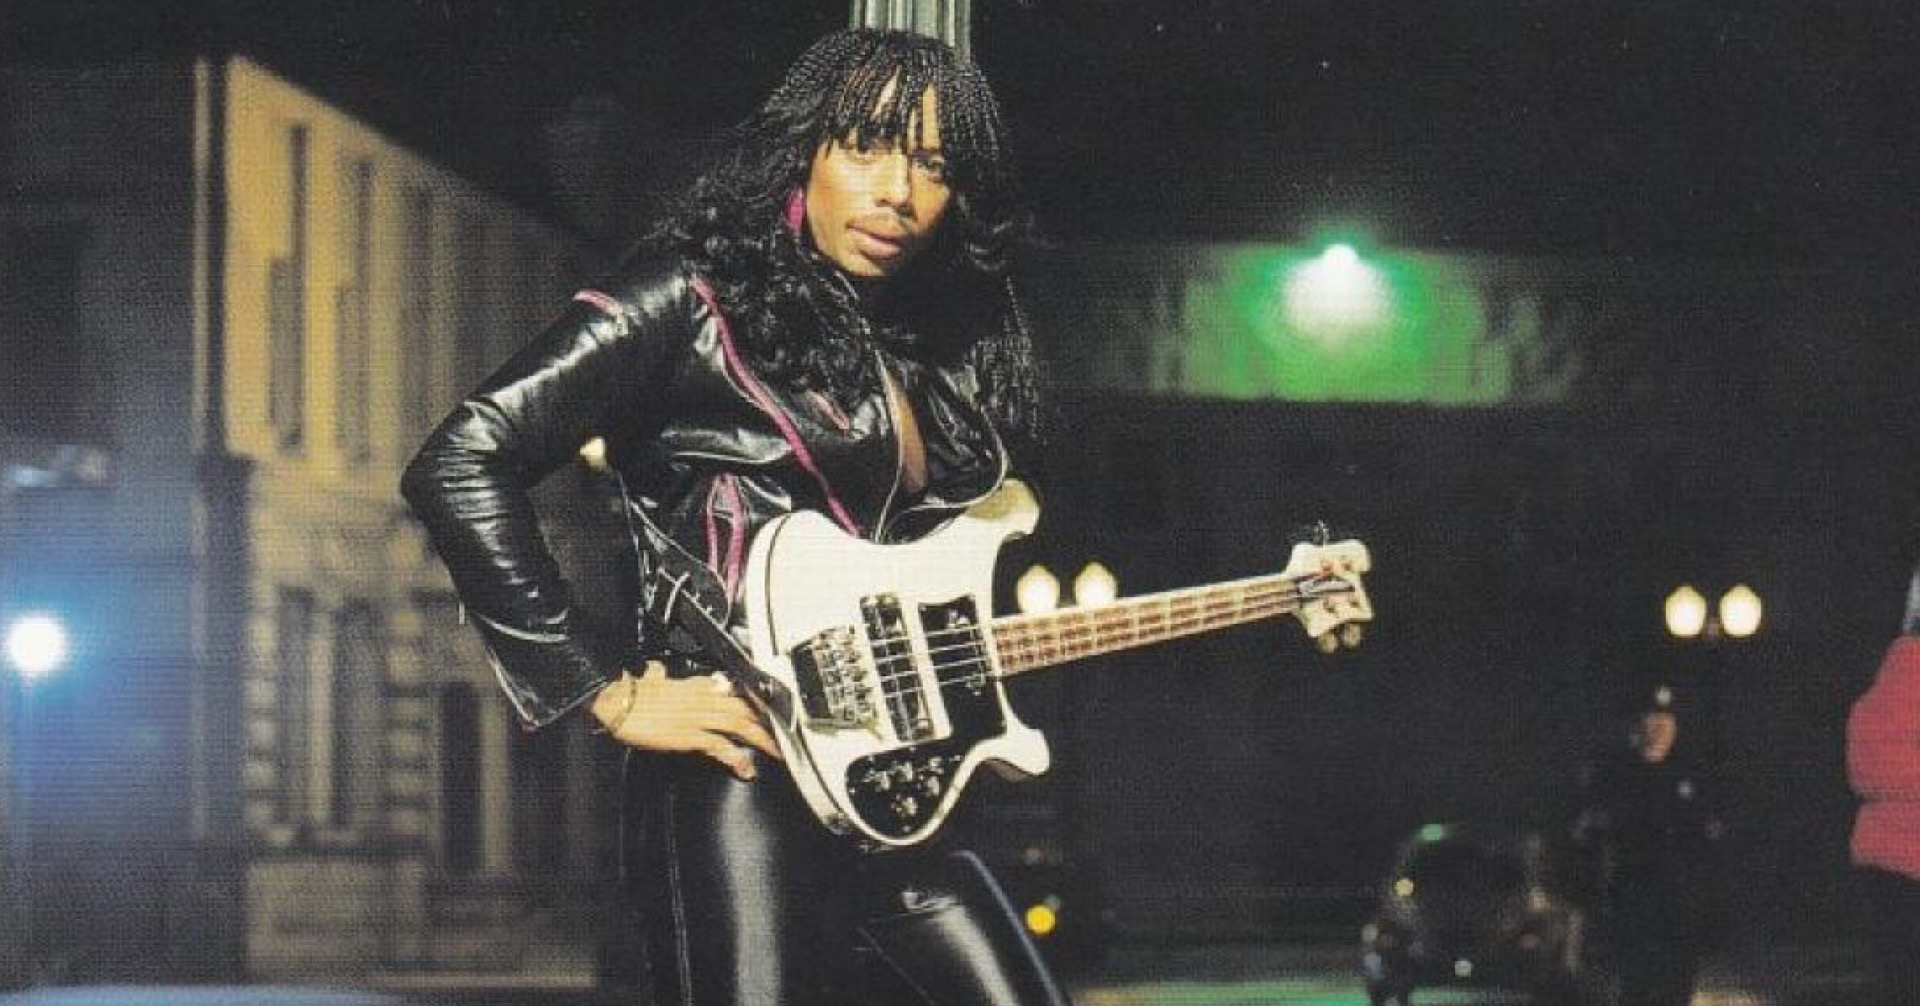 40 Years Ago Rick James Put Some “street” On The Chartsand Dominated